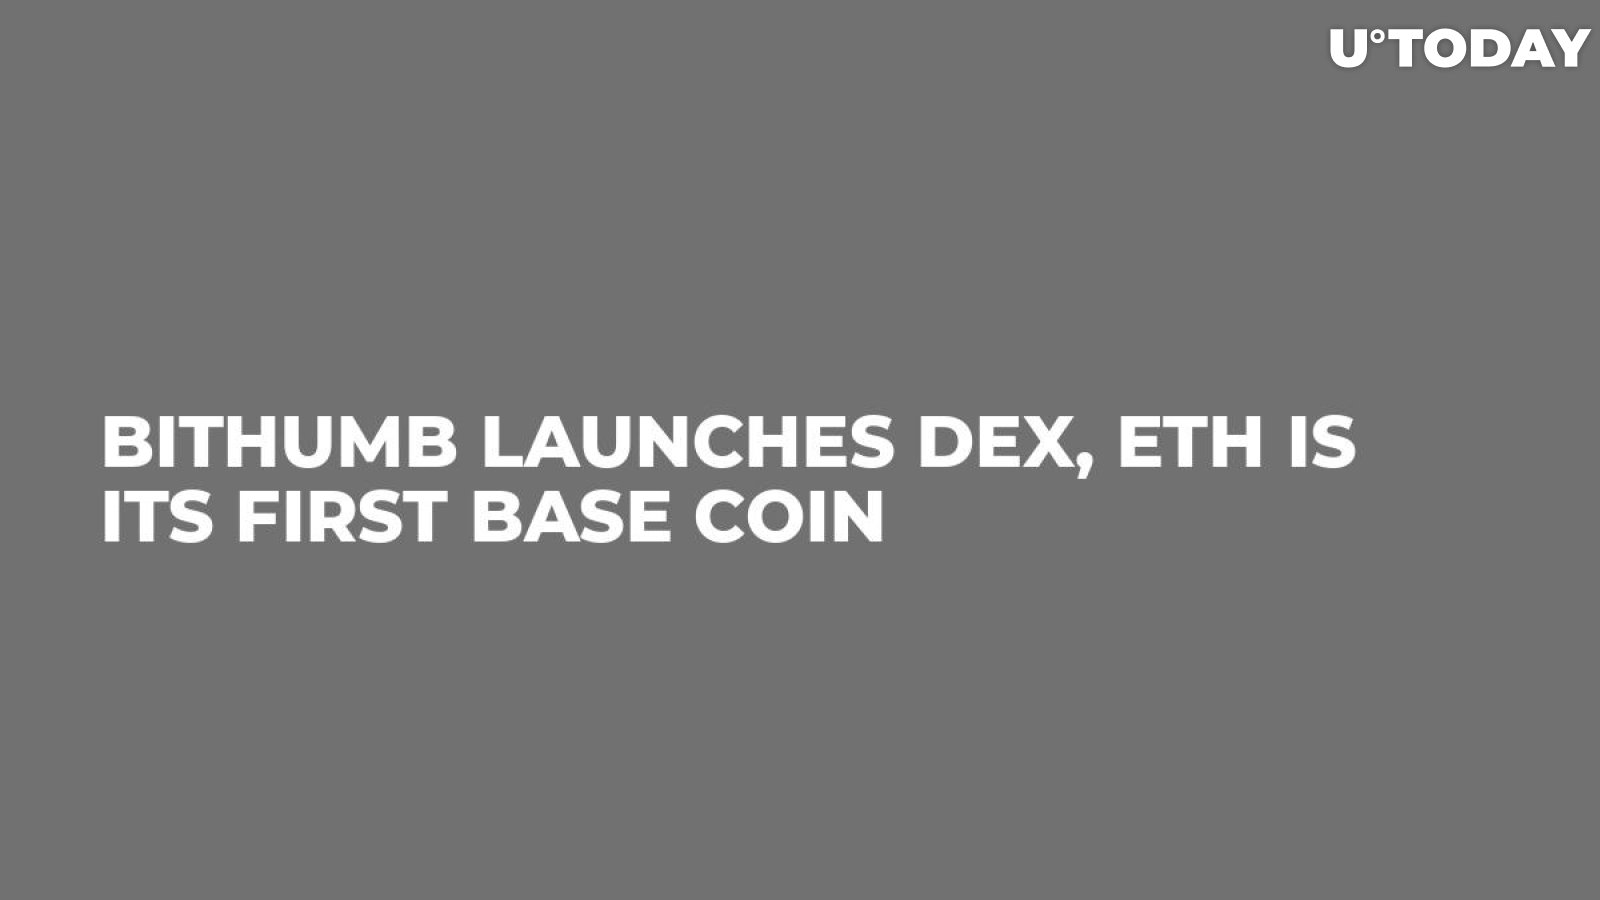 Bithumb Launches DEX, ETH Is Its First Base Coin